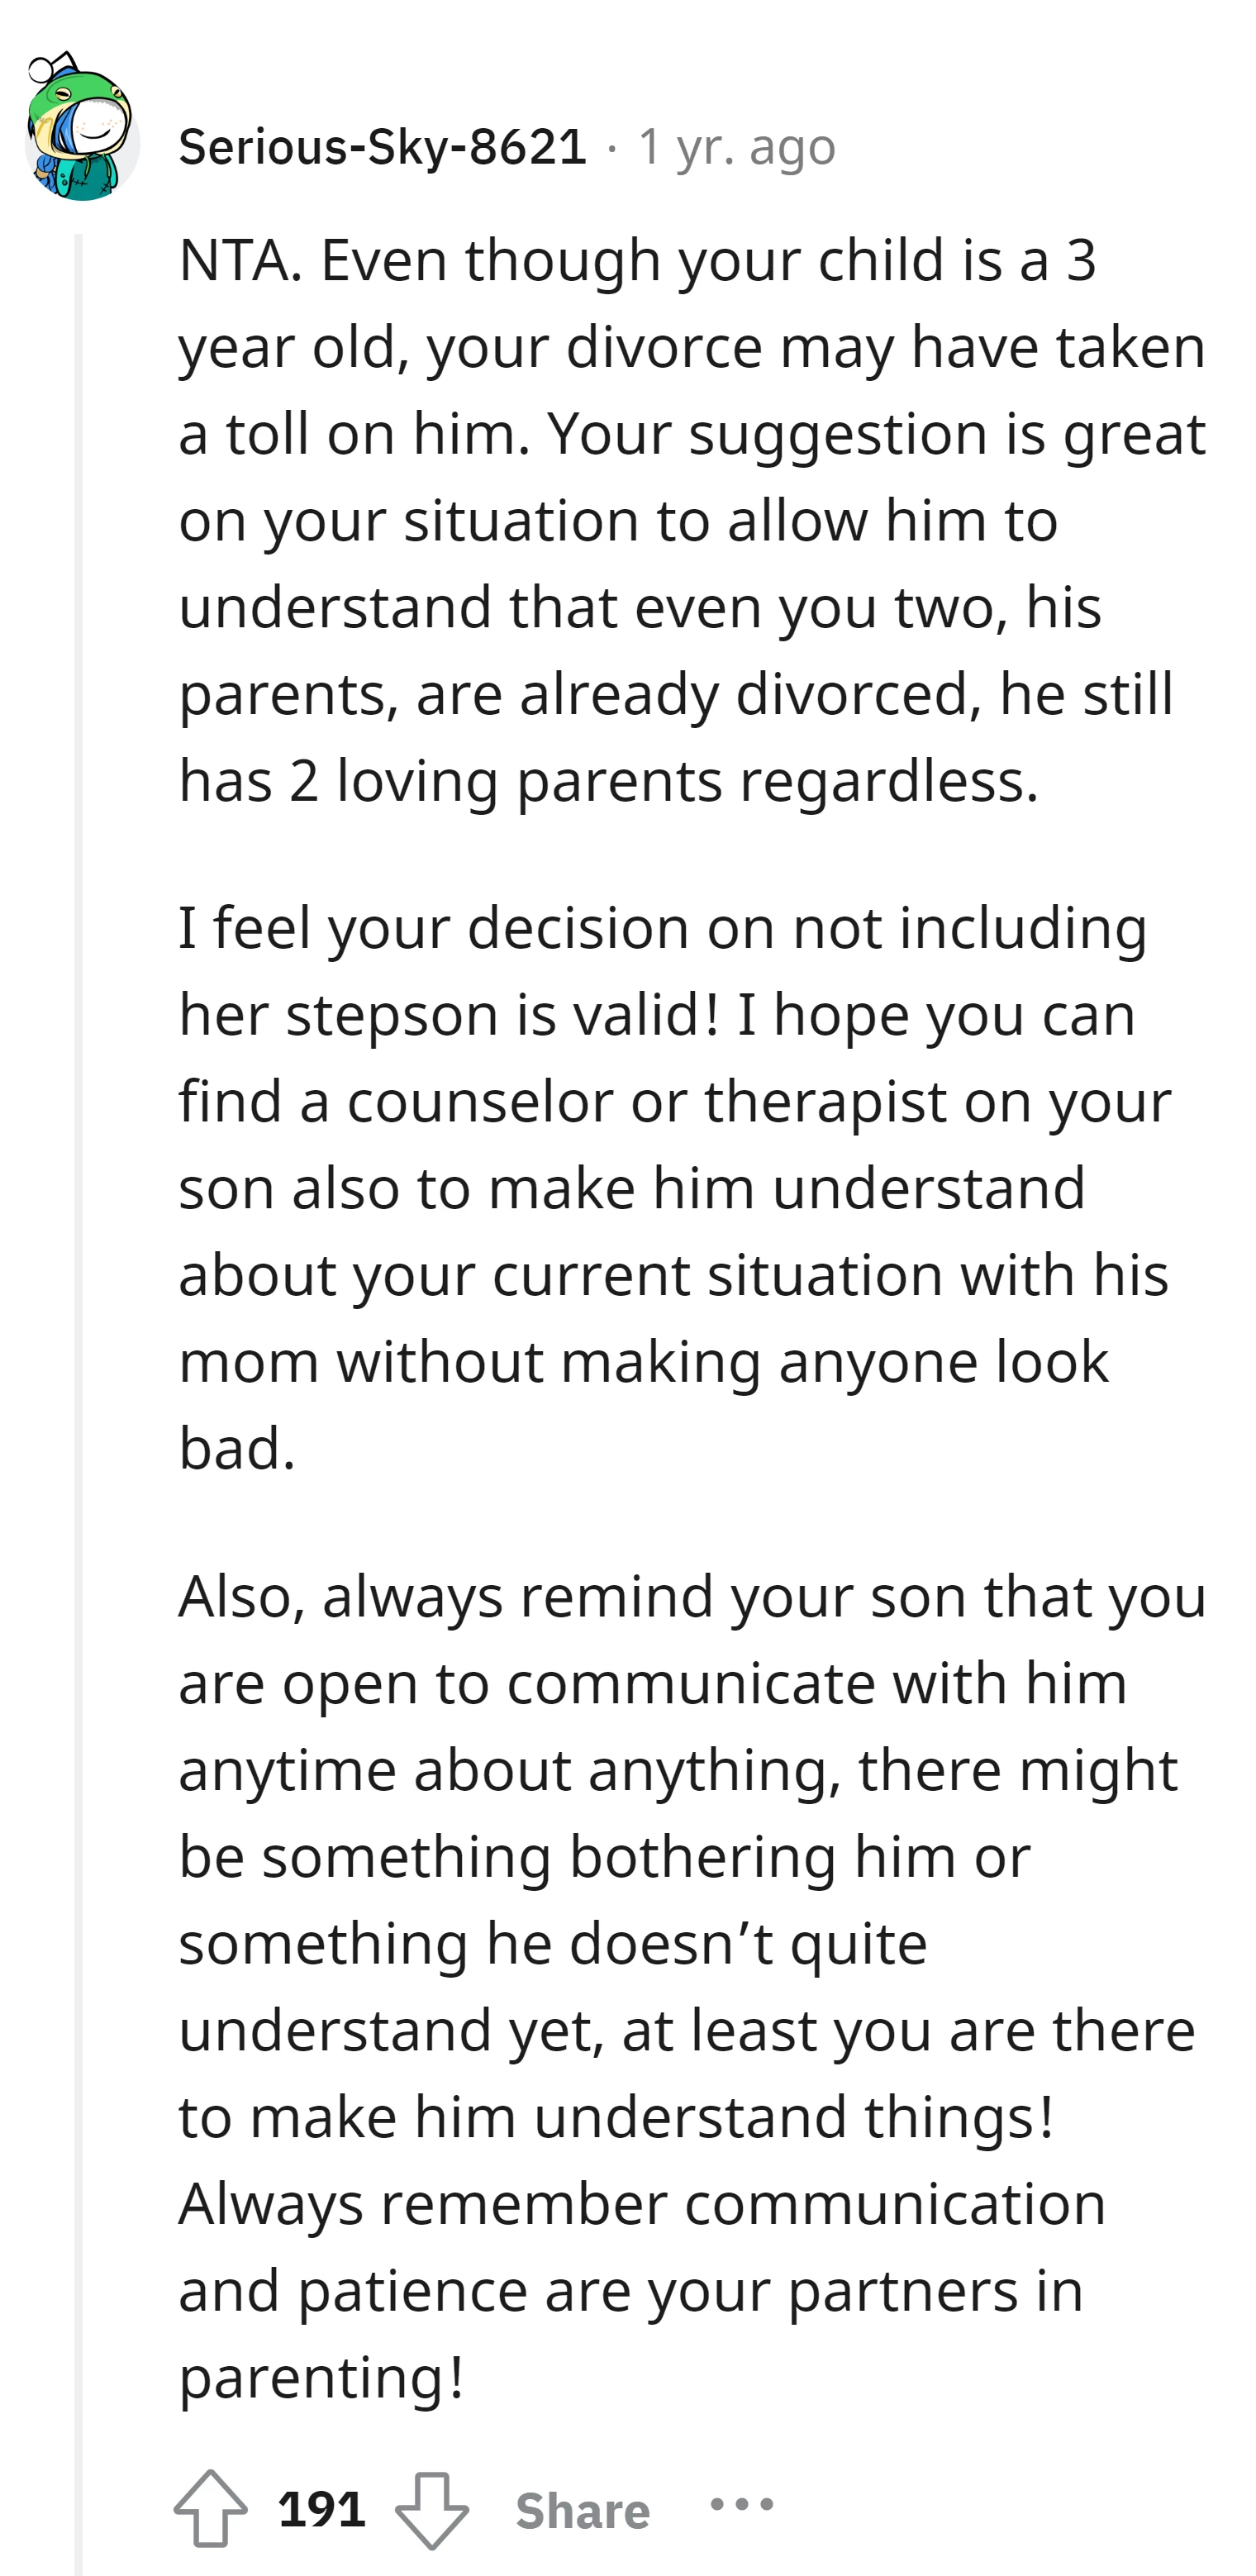 Seek a counselor or therapist to help the child understand the divorce situation